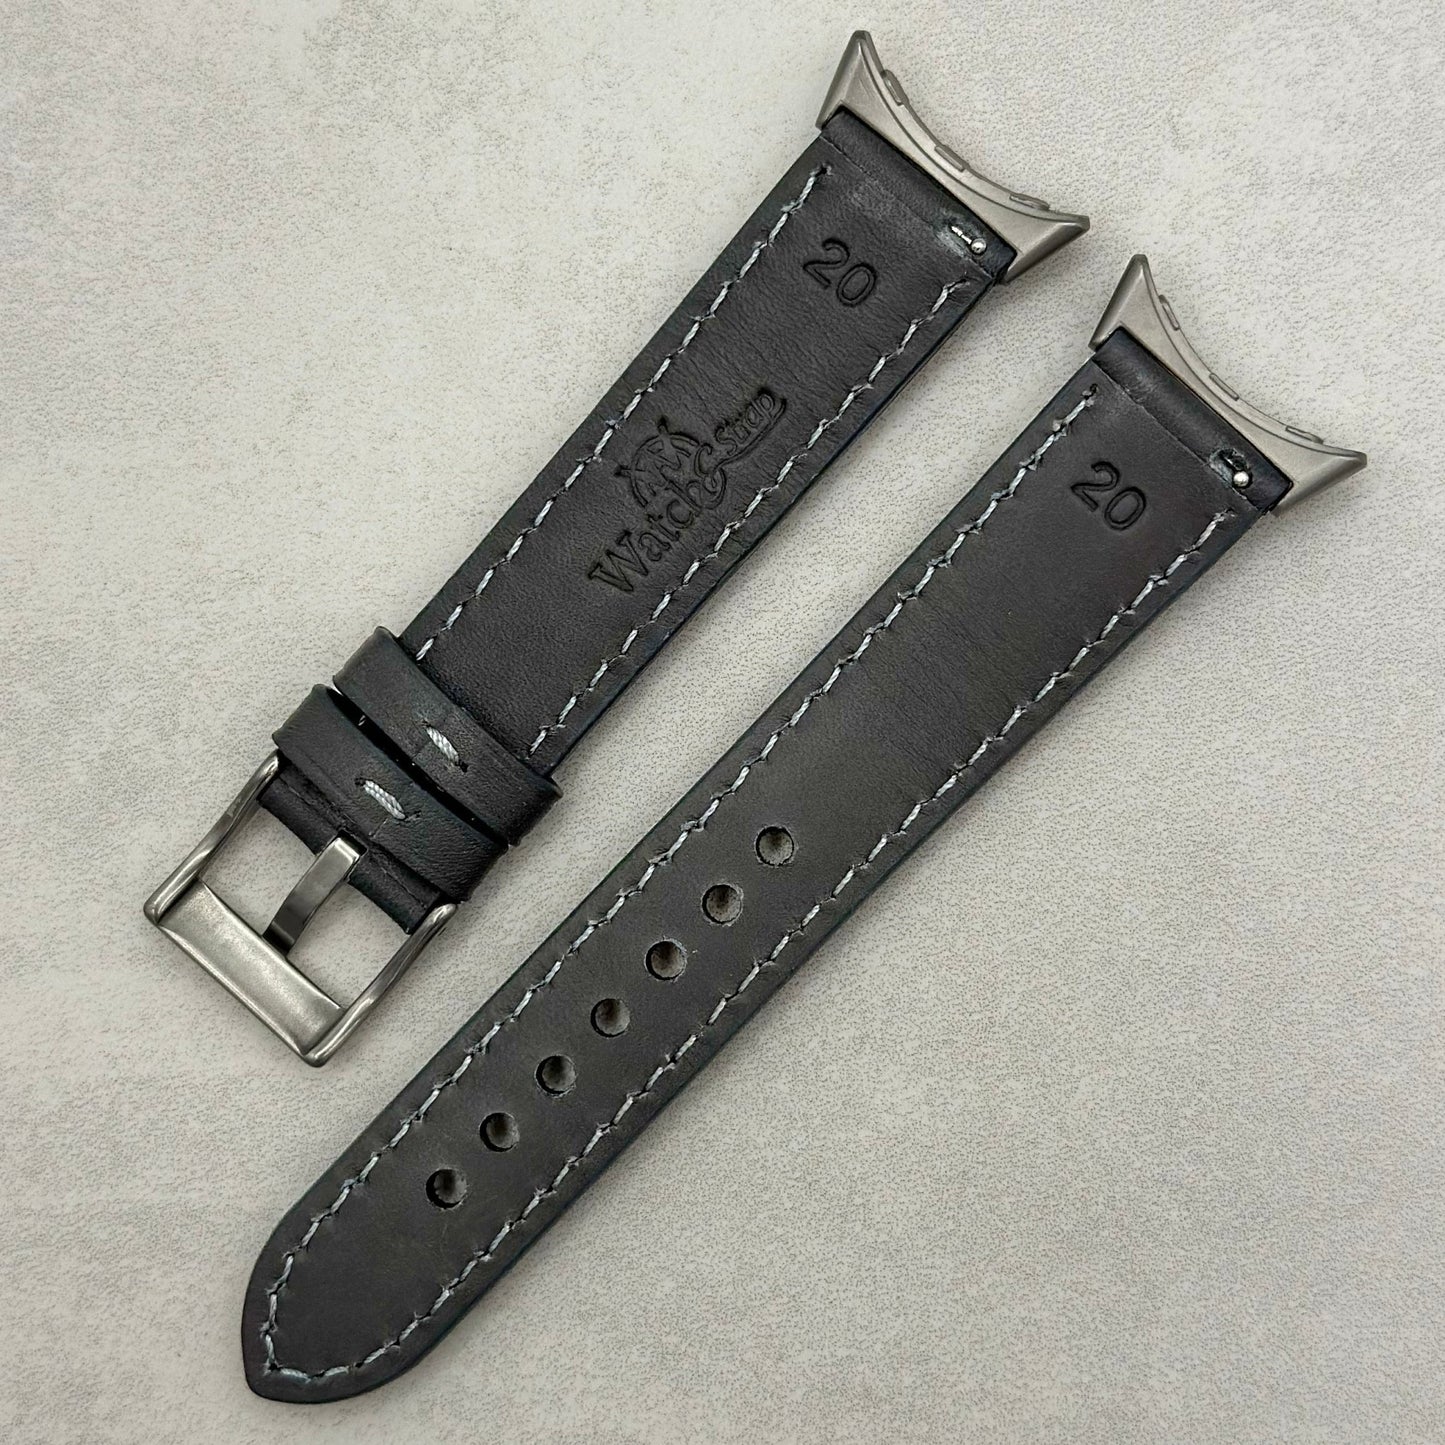 Rear of the Athens slate grey Google Pixel Watch strap. Watch And Strap logo.